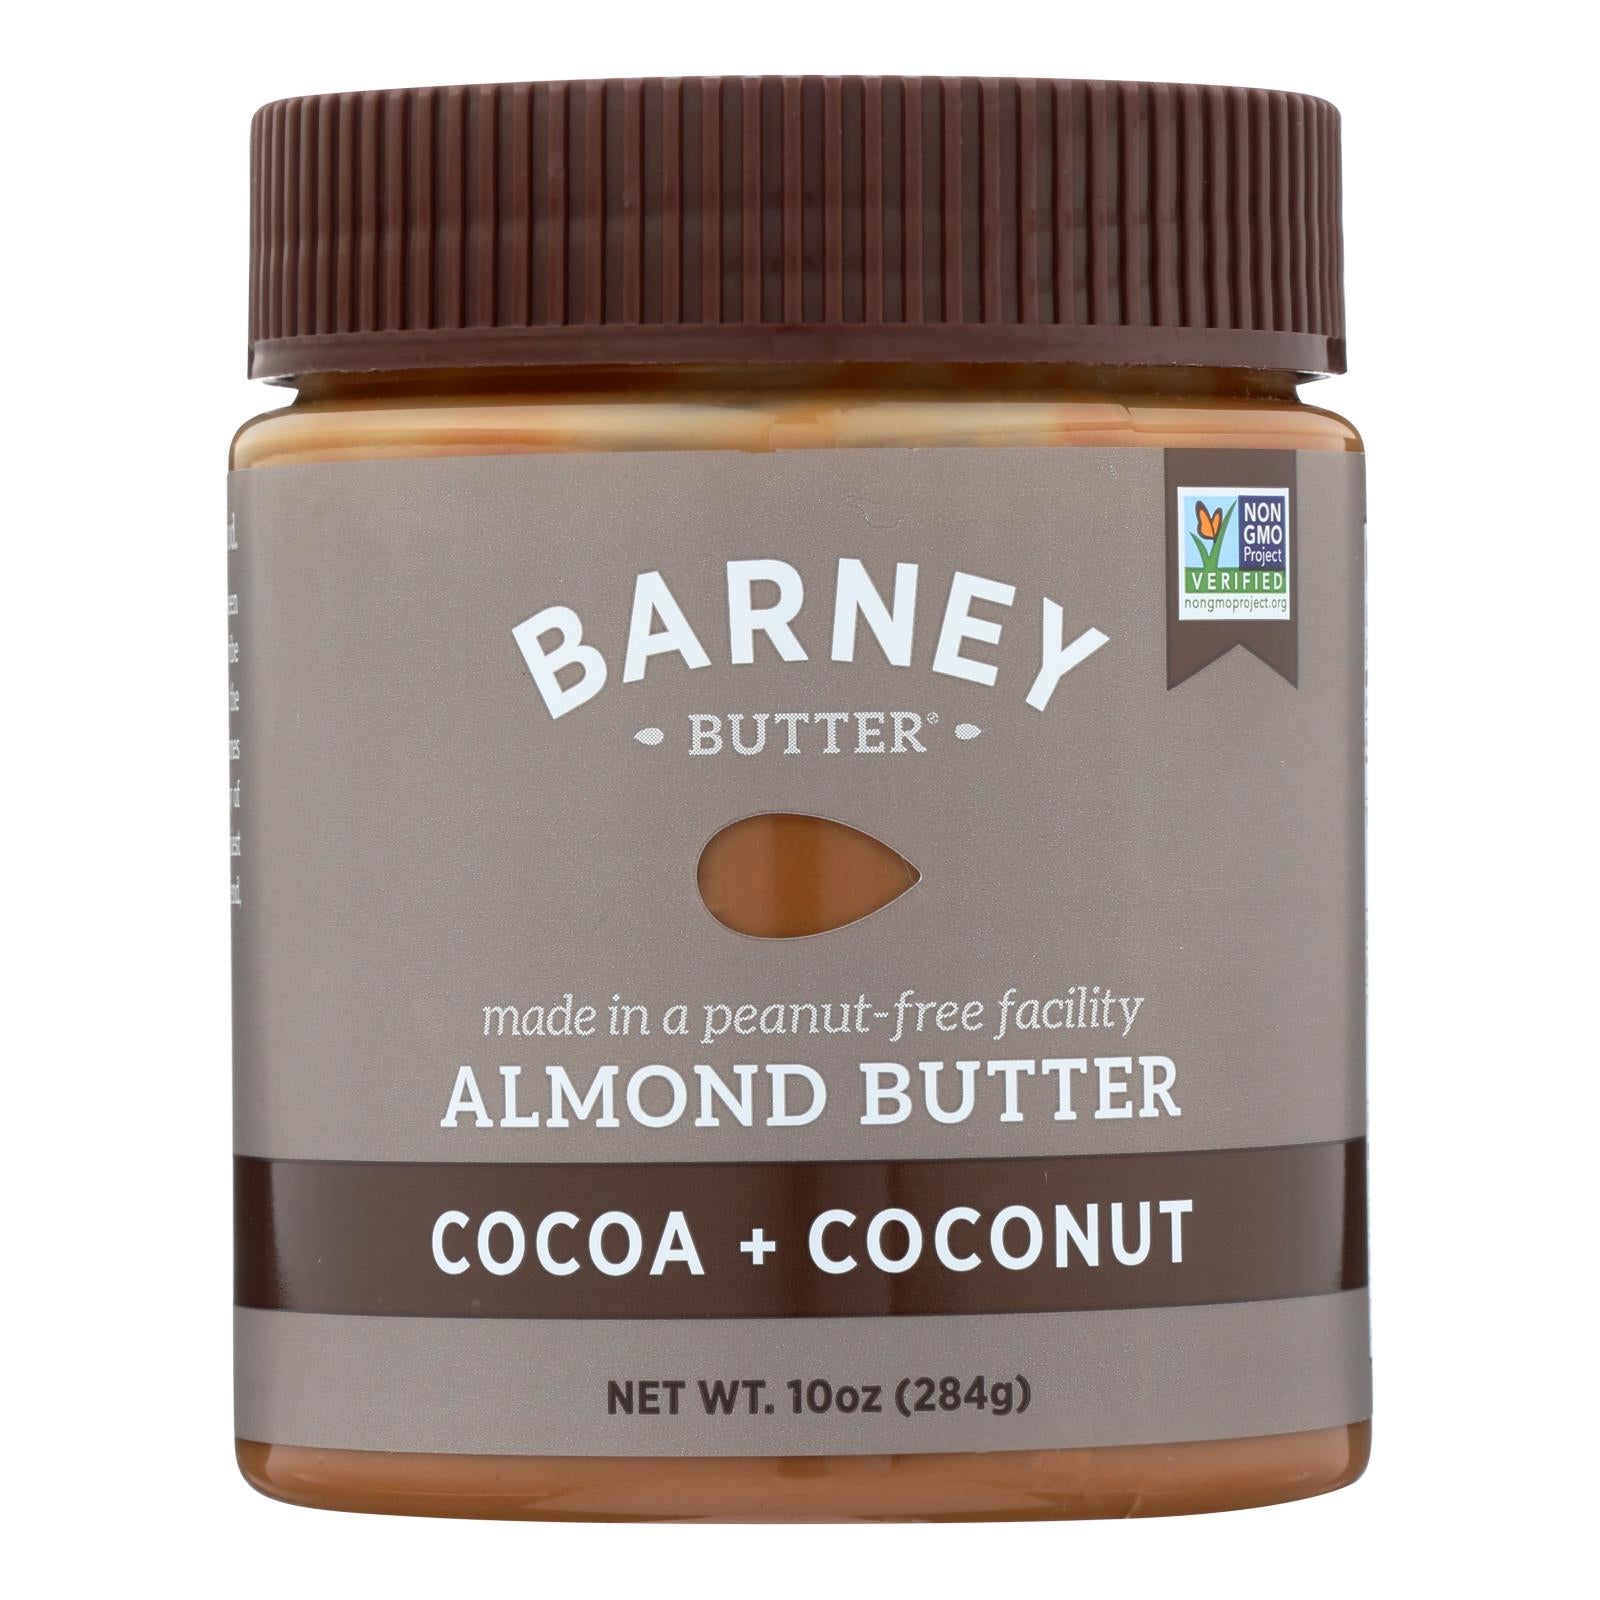 Barney Butter, Barney Butter - Almond Butter - Cocoa Coconut - Case of 6 - 10 oz. (Pack of 6)